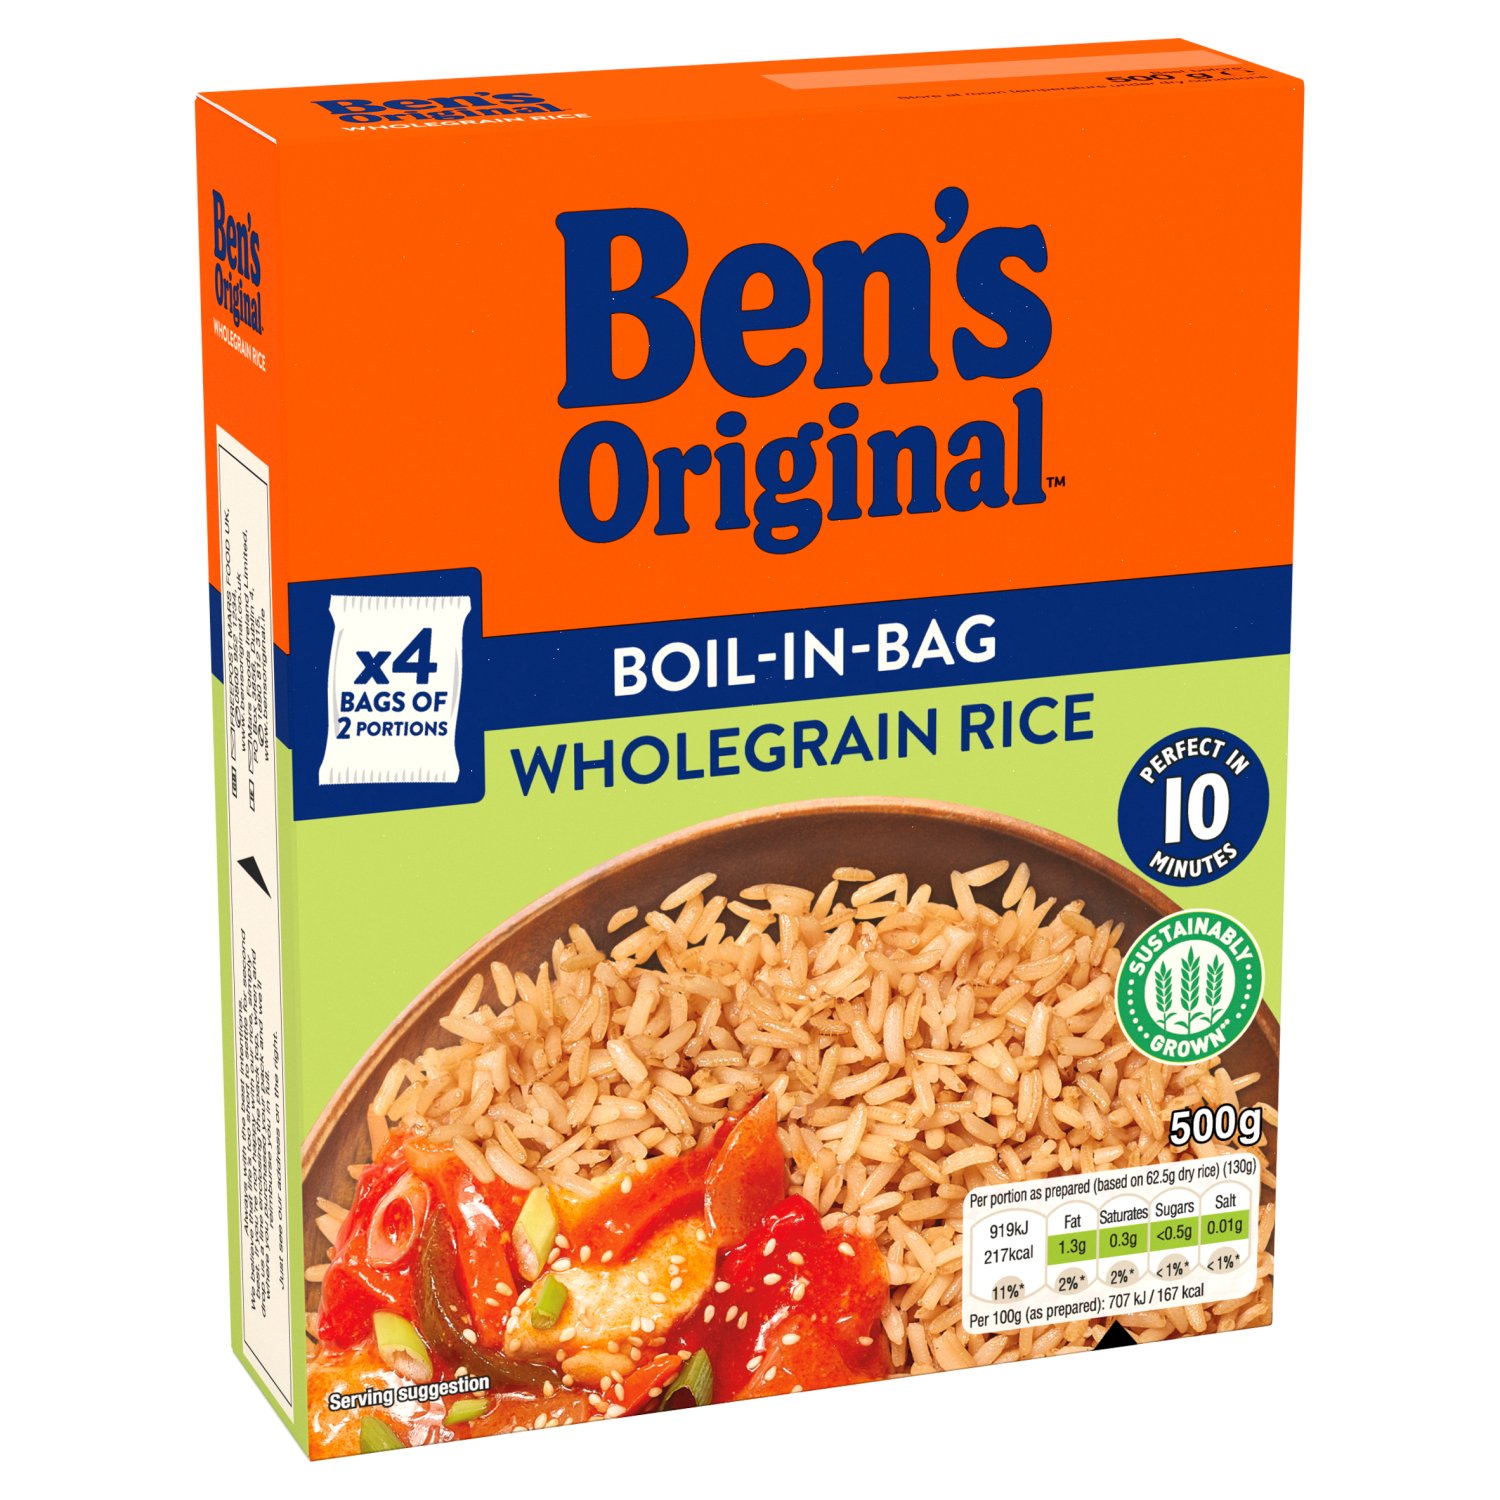 Ben´s Original™ Boil-in-Bag Wholegrain rice is simple and versatile; one of our classics. Our pre-measured boil in the bag rice portions keep every grain of rice fluffy and delicious, and it cooks in just 10 minutes for perfect rice in no time.

Ben´s Original™ Wholegrain rice helps you create a delicious and wholesome meal that can be enjoyed any day of the week. Why not try it with chilli con carne, in a colourful buddha bowl, or even something of your own imagination!

Packaging may vary.